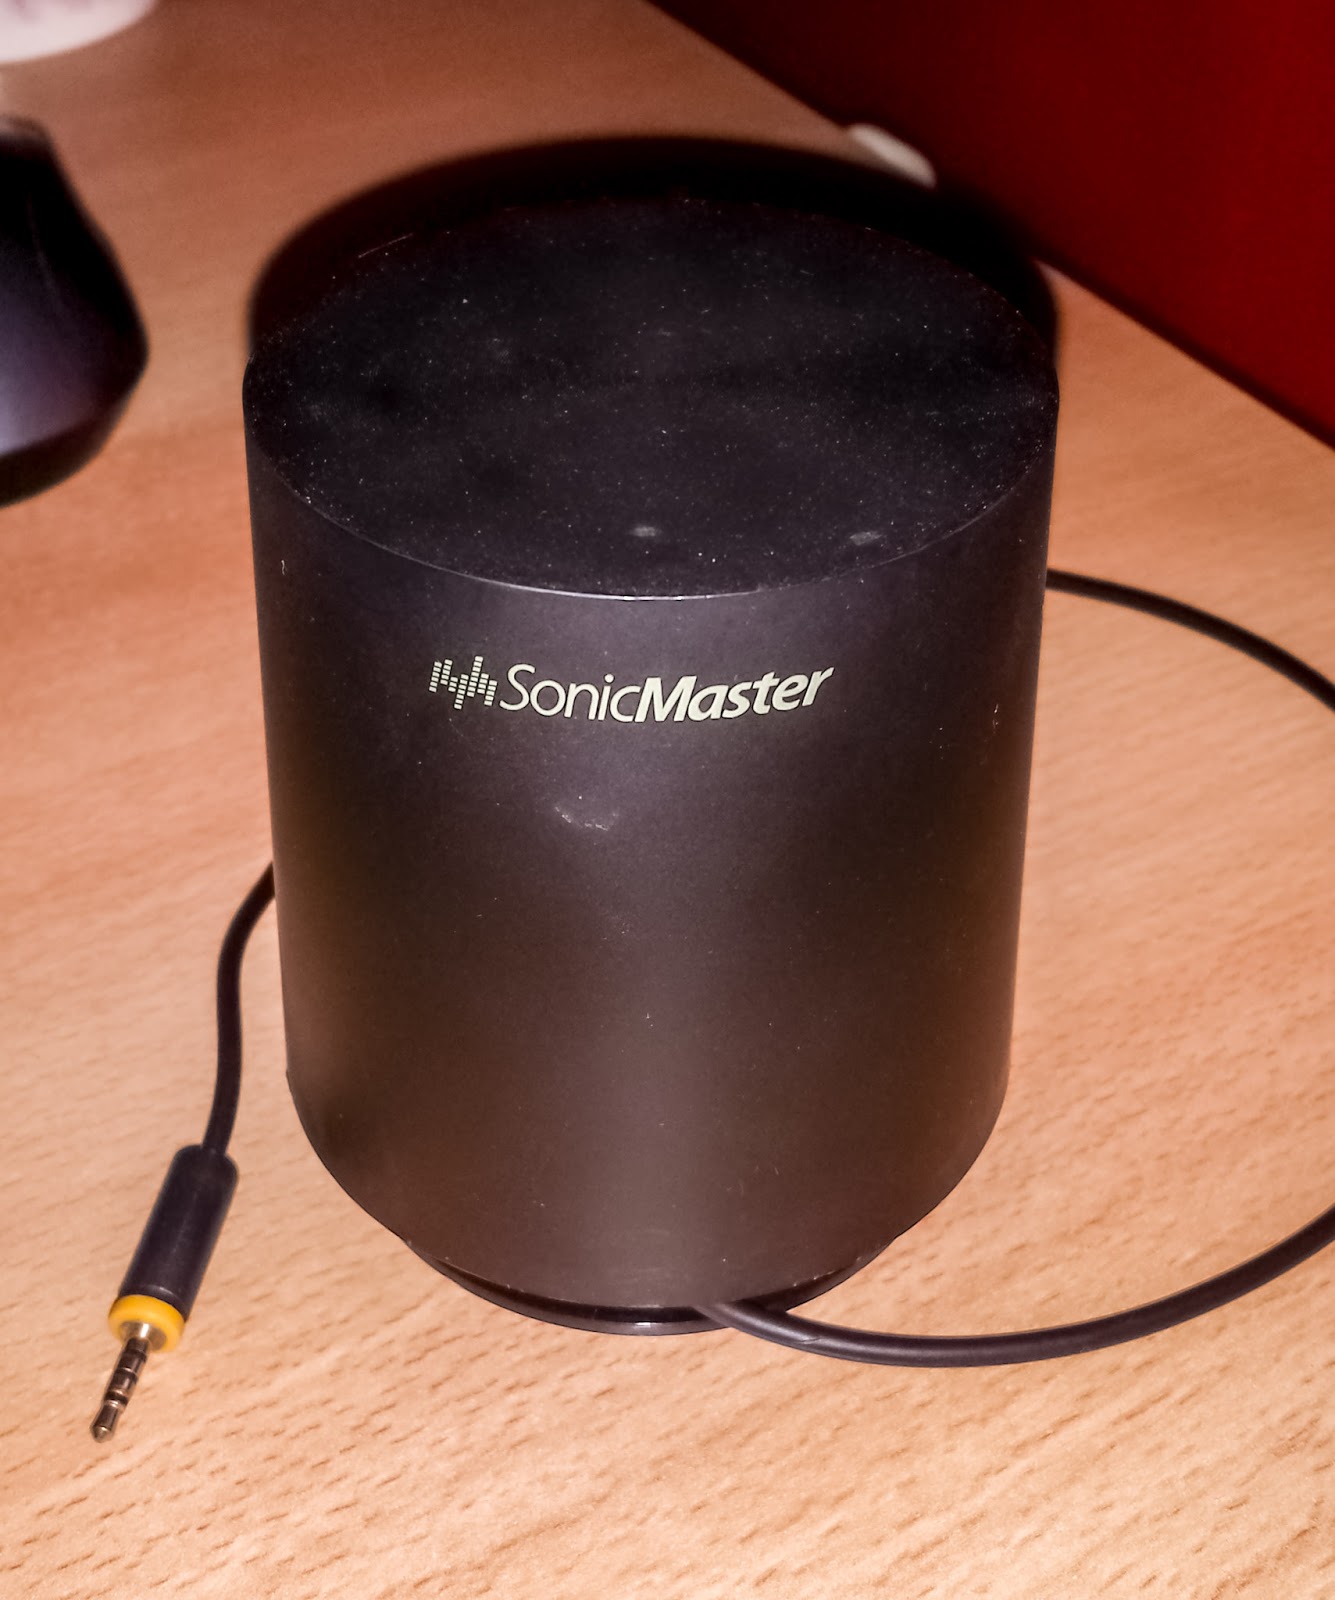 Tech for Asus SonicMaster SubWoofer